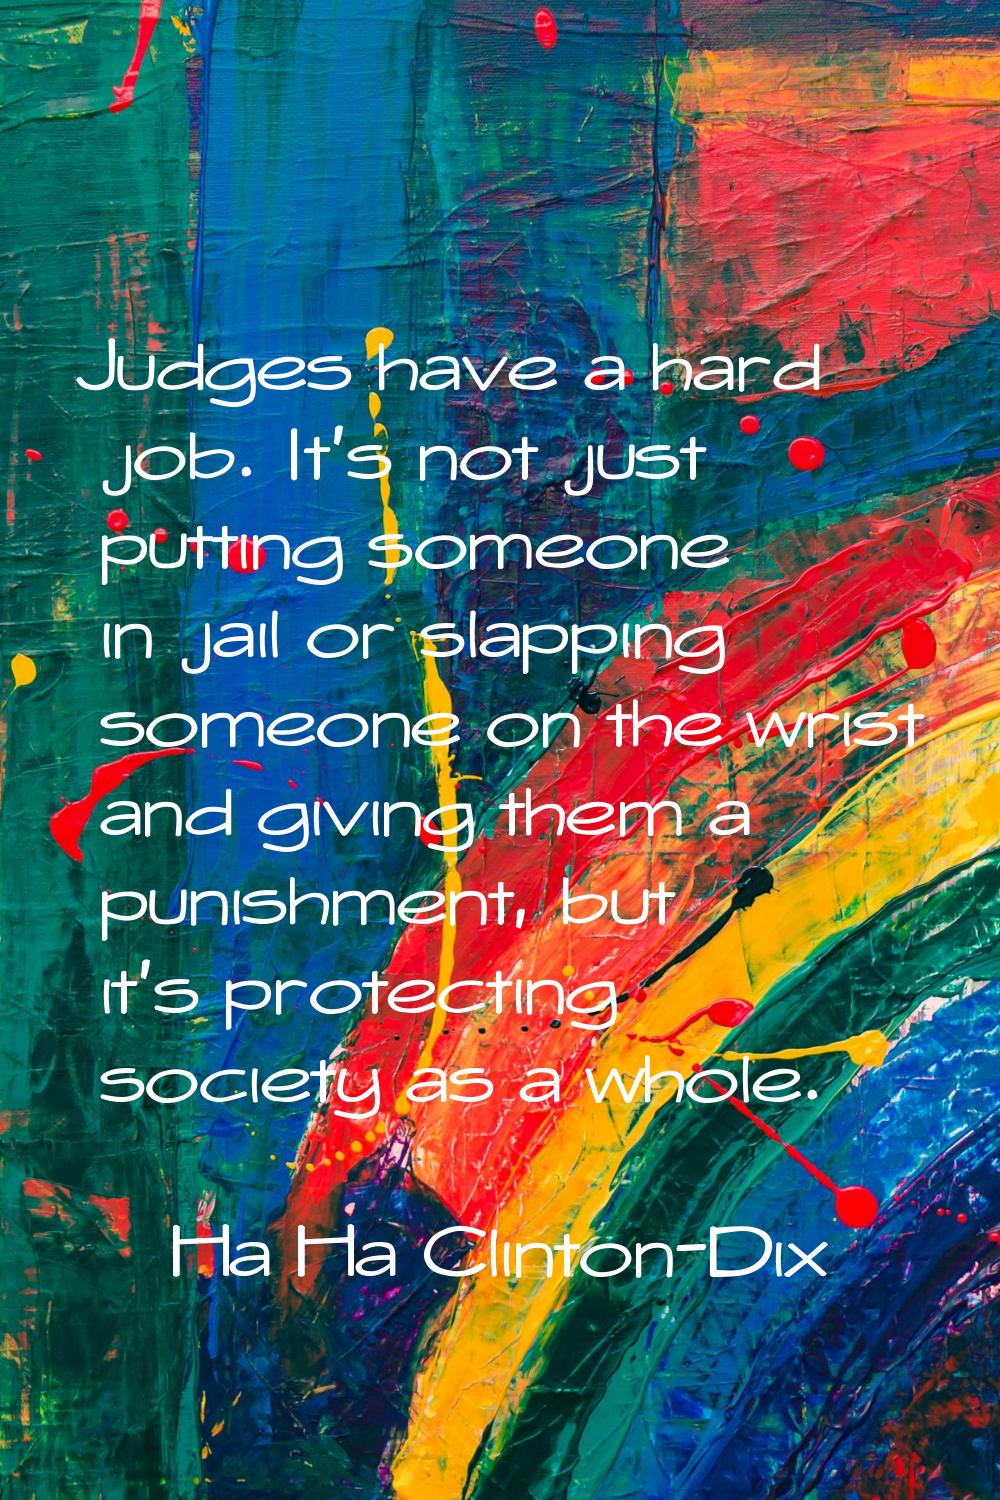 Judges have a hard job. It's not just putting someone in jail or slapping someone on the wrist and 